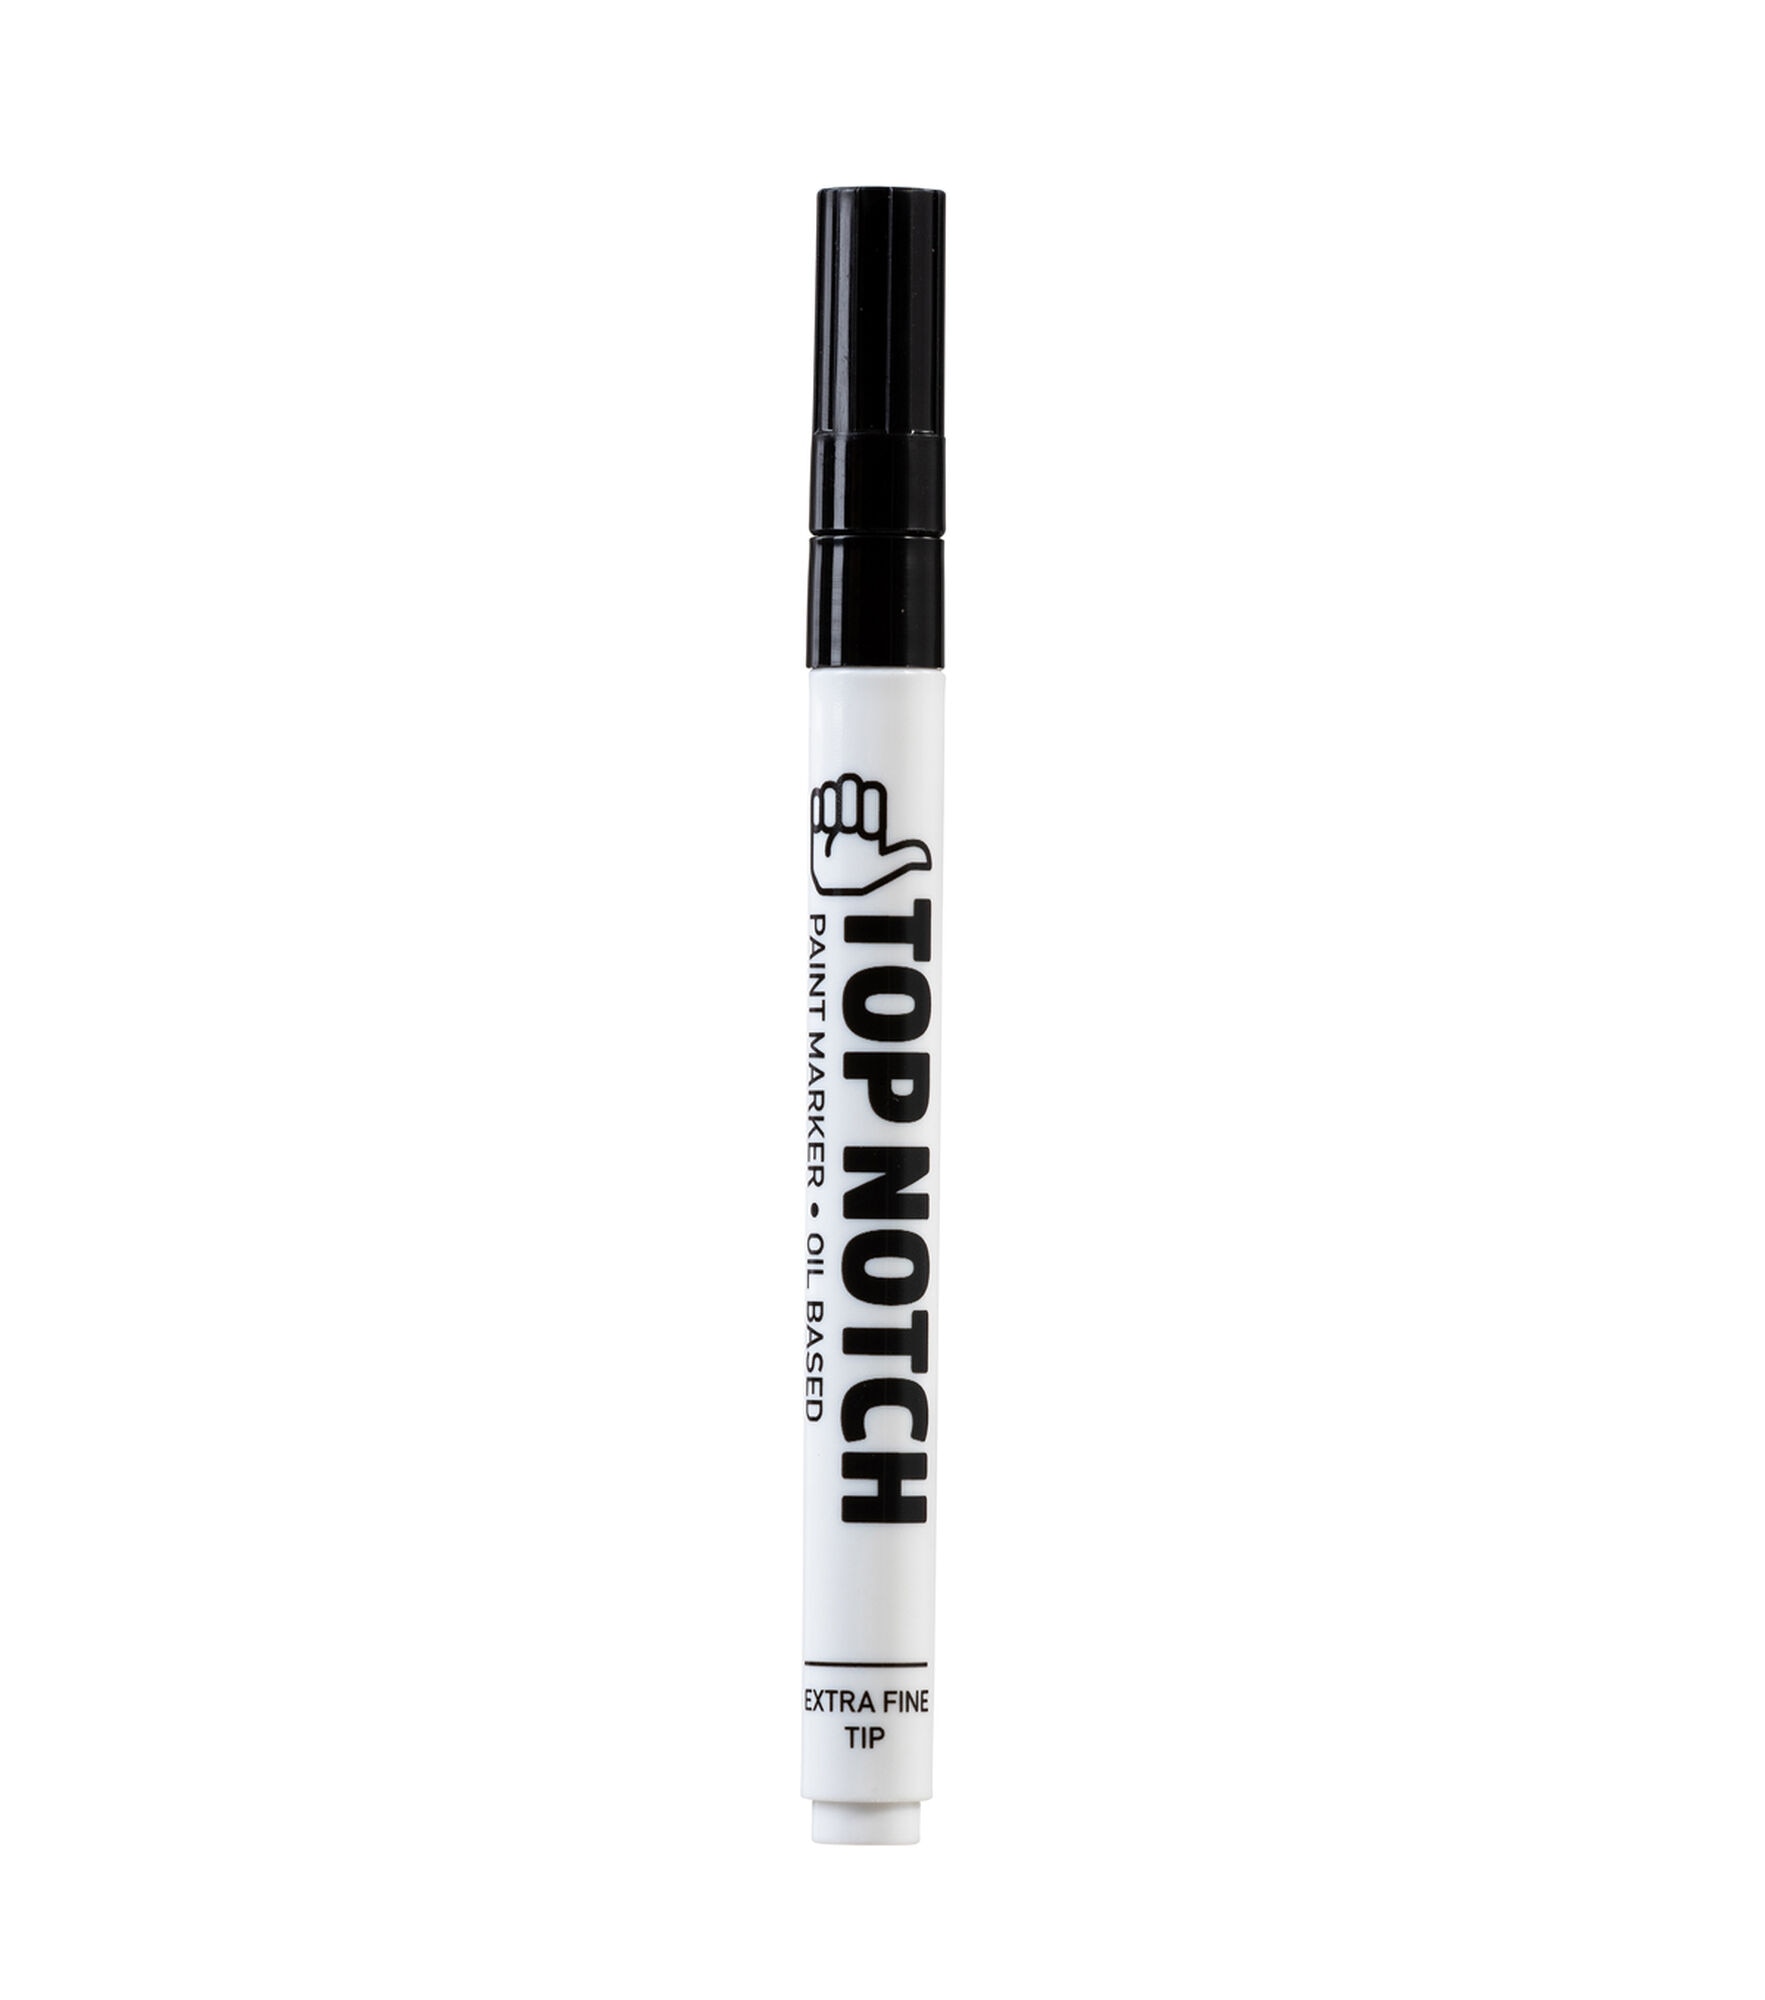 Top Notch Extra Fine Tip Paint Marker - Silver - Paint Markers - Art Supplies & Painting